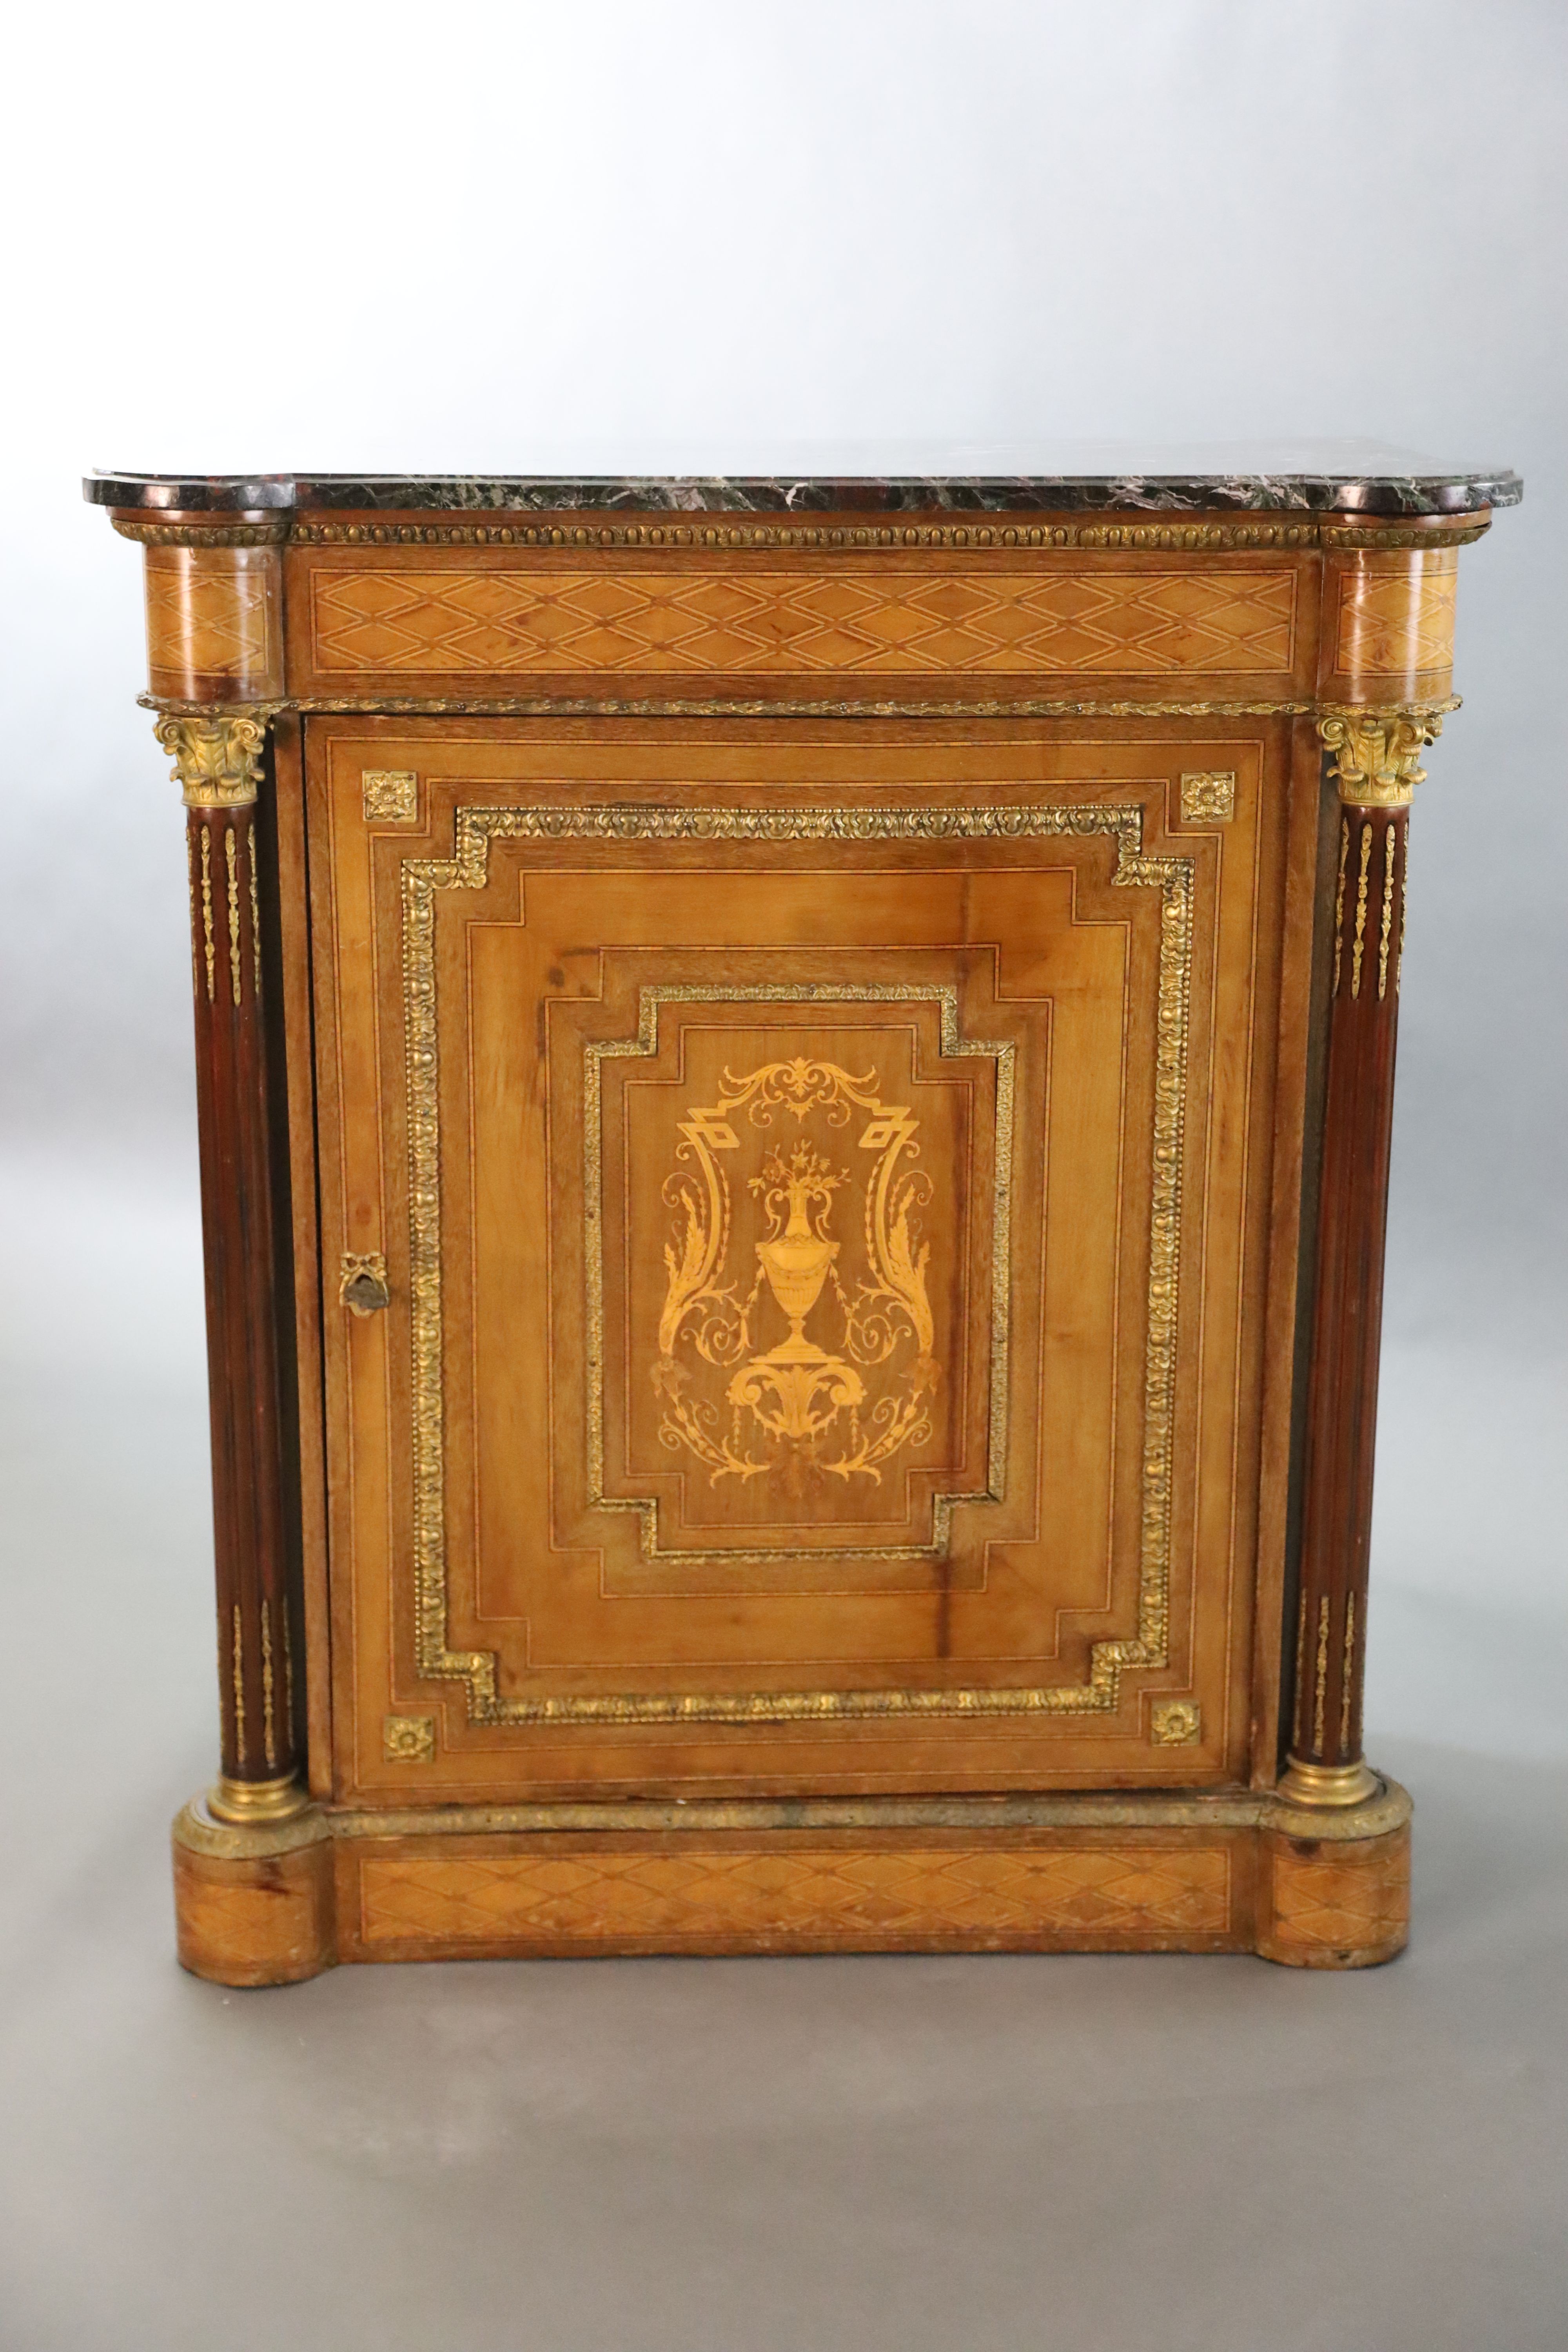 A 19th century French ormolu mounted, walnut and marquetry Meuble dappoint, W.2ft 11in. D.1ft 5in. H.3ft 3.5in.